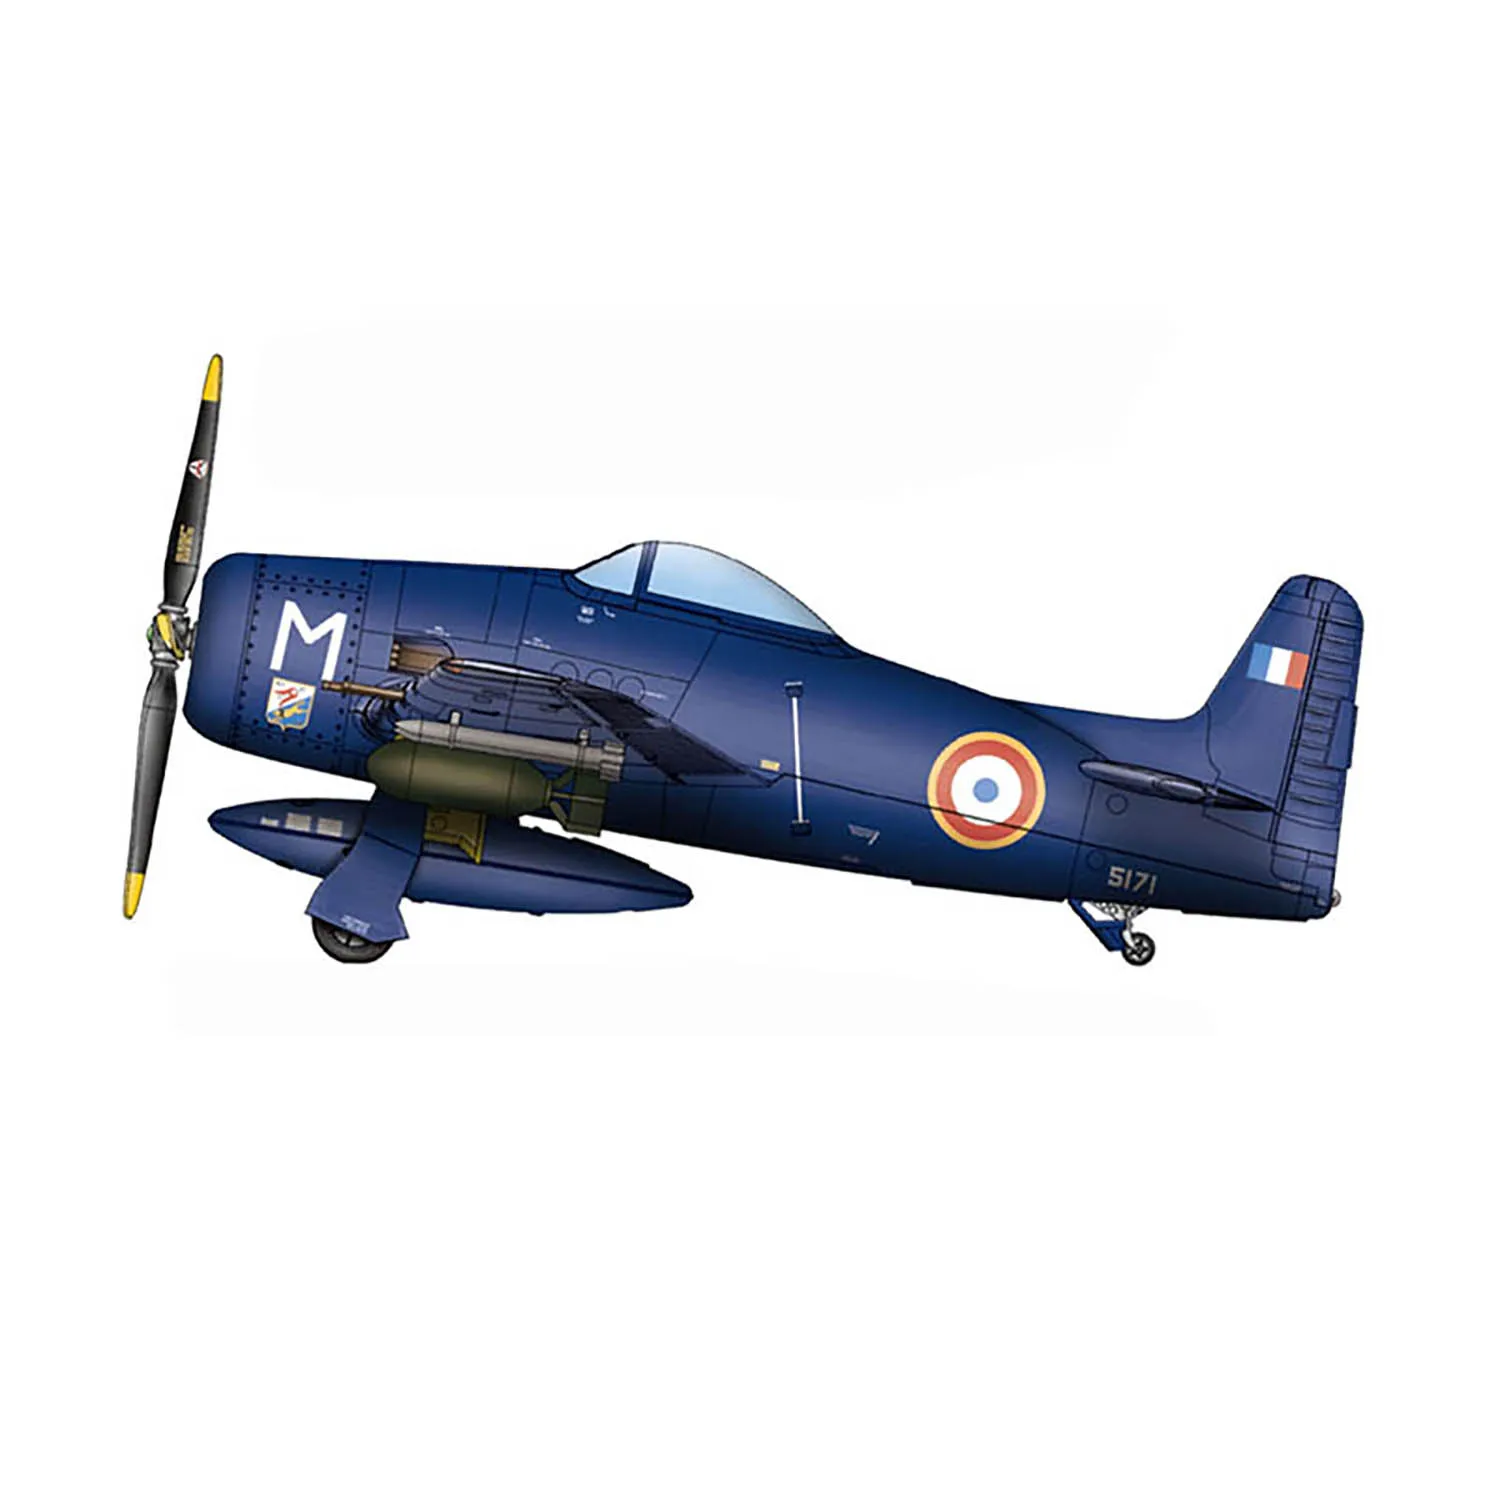 

1/72 Hobby Boss 87268 F8F-1B Bearcat Fighter Airplane Static Aircraft Display Plane Model Kits Collection Toys TH20201-SMT6